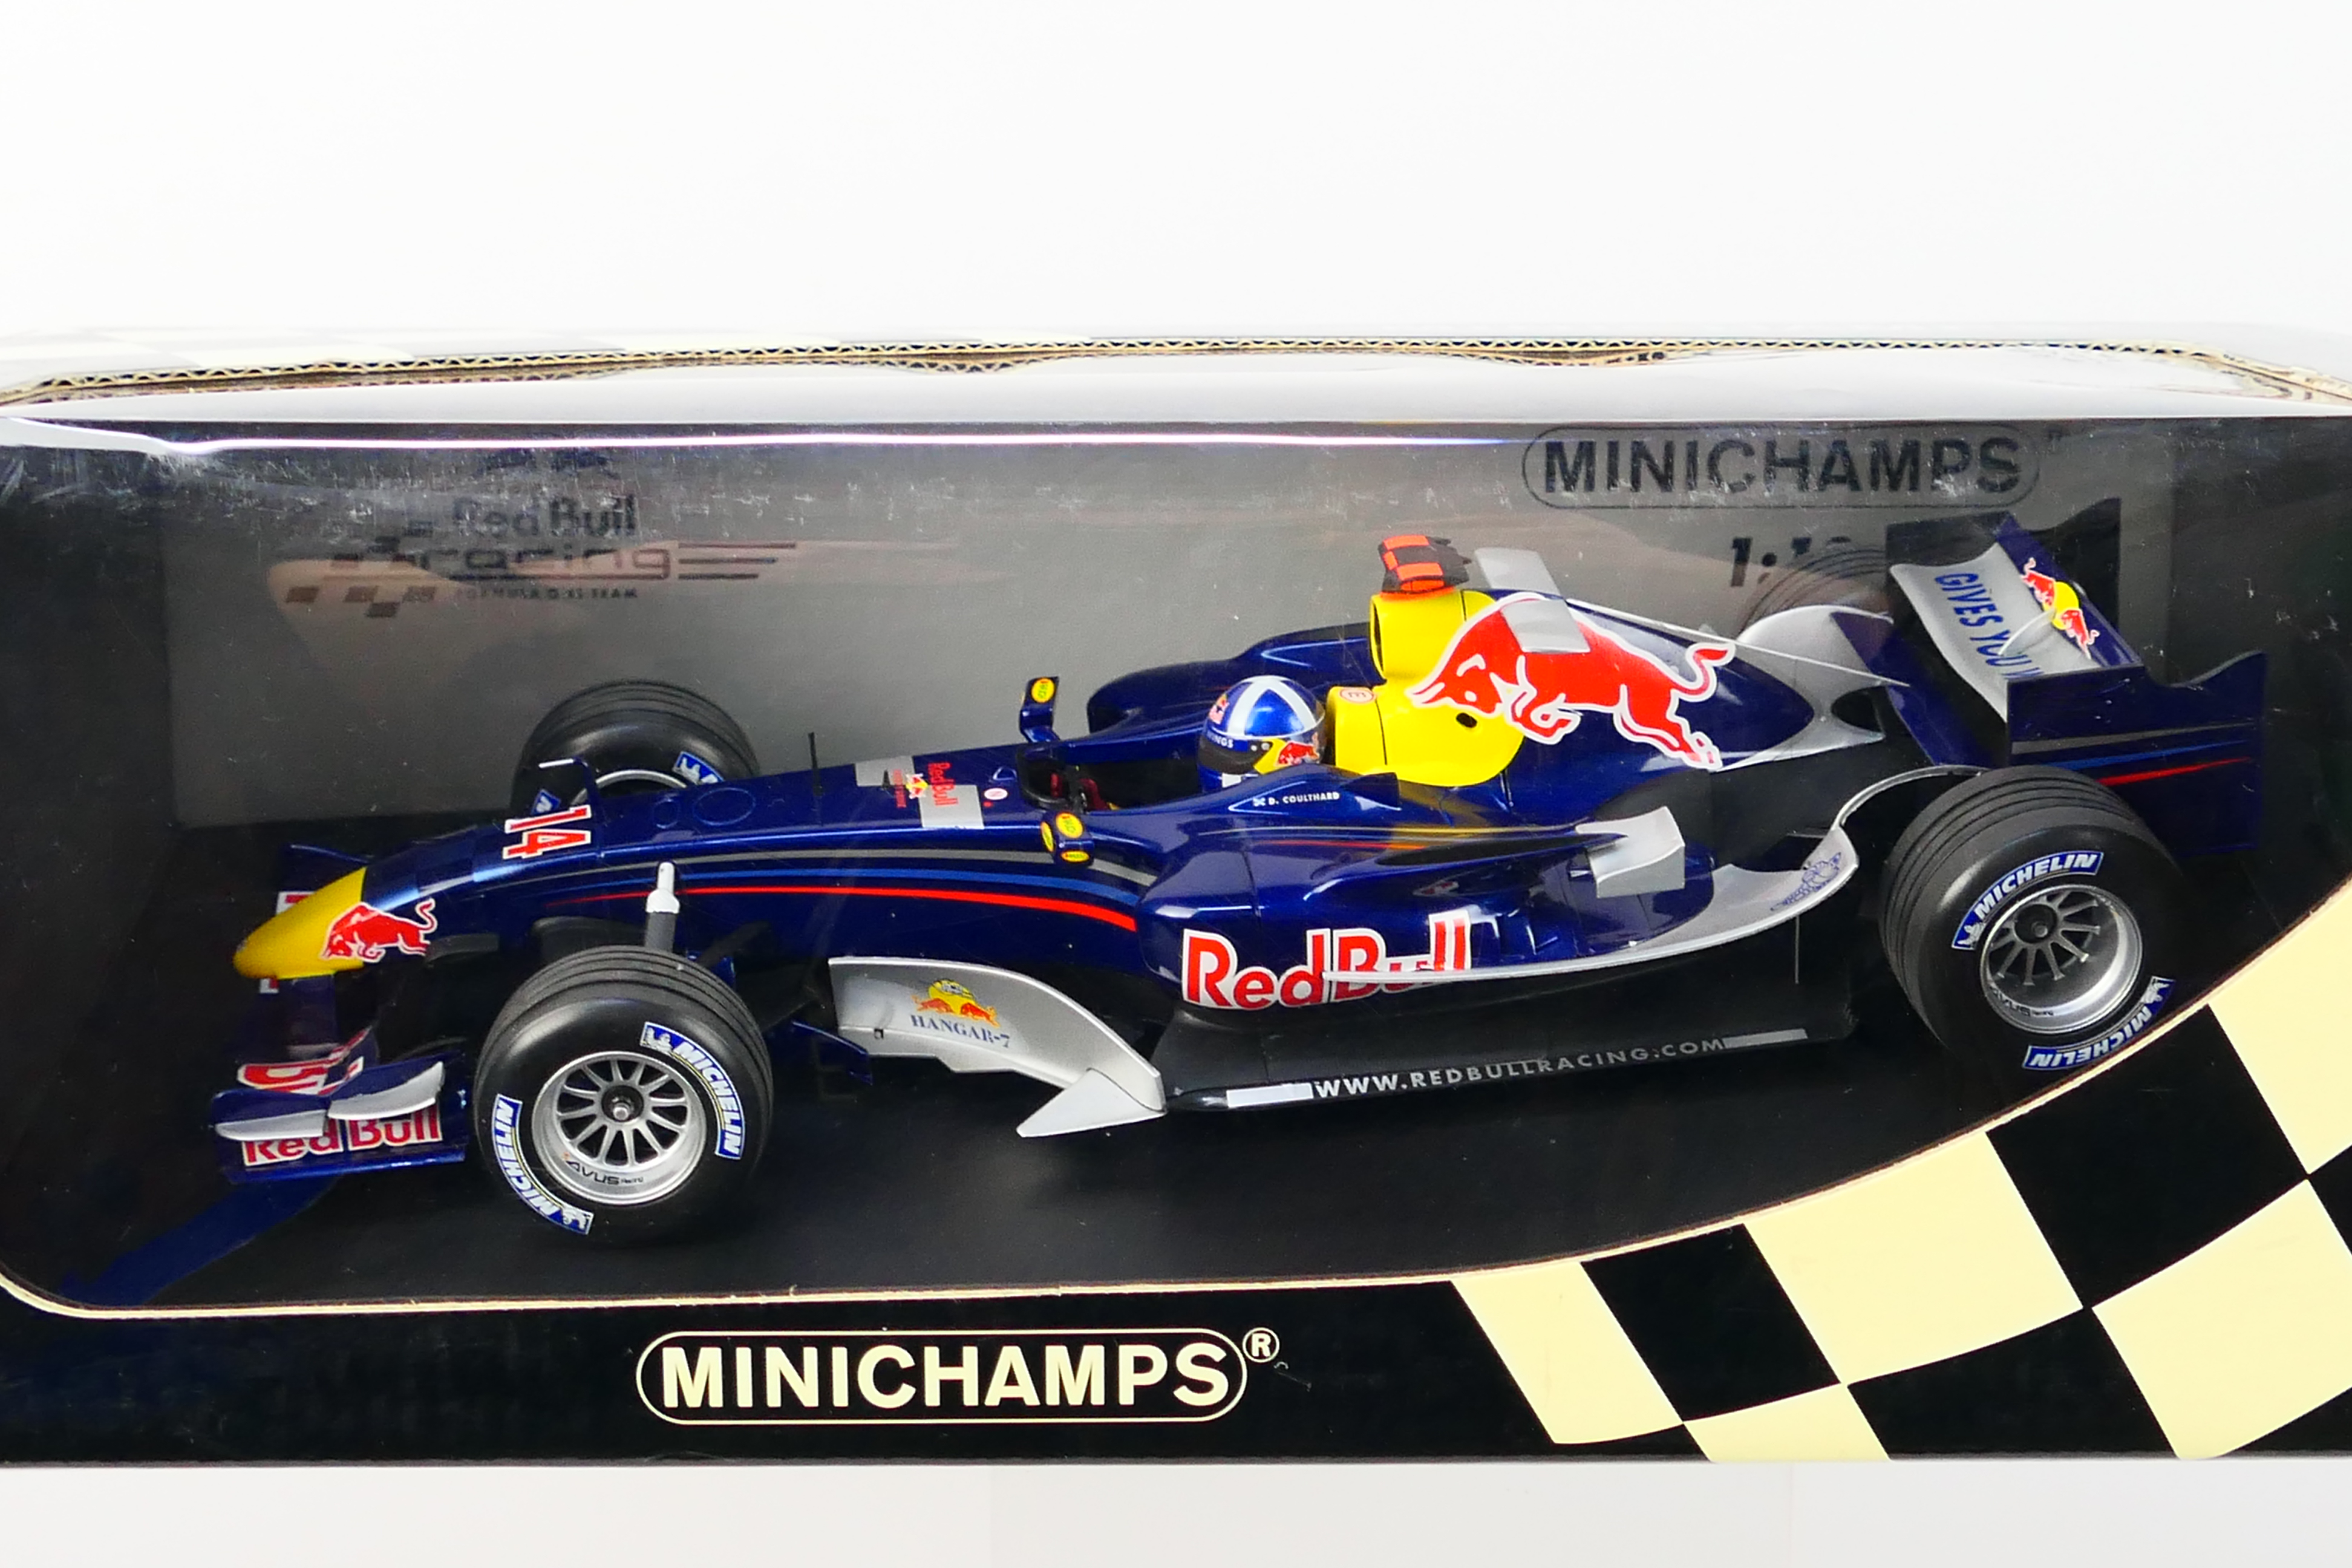 Minichamps- A boxed 1:18 scale Red Bull Racing RB2 David Coulthard 2006 car which appears Mint in a - Image 2 of 3